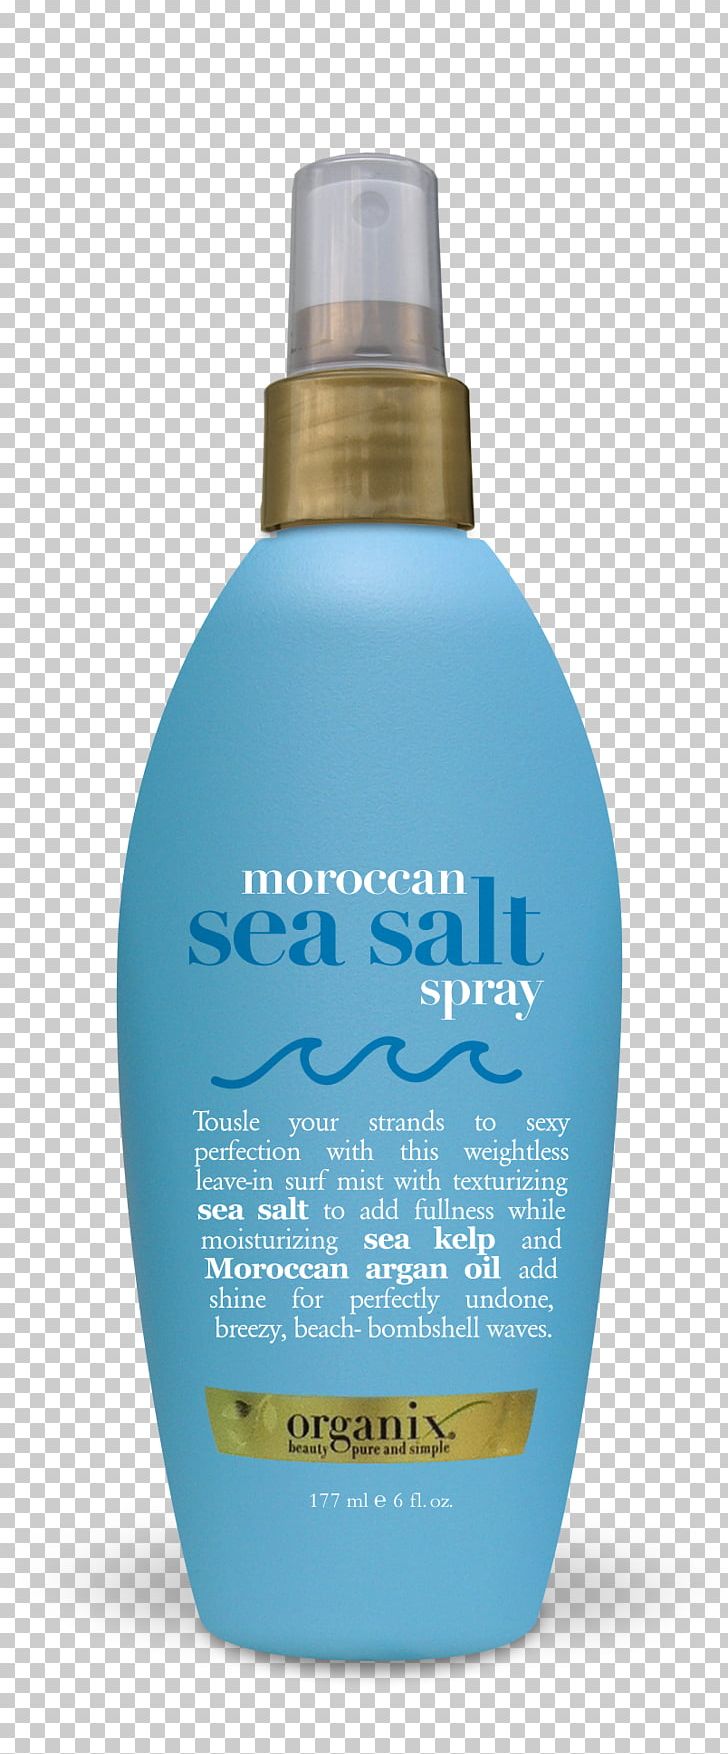 OGX Moroccan Sea Salt Spray Hair Styling Products Lotion PNG, Clipart, Argan, Cosmetics, Hair, Hair Care, Hair Spray Free PNG Download